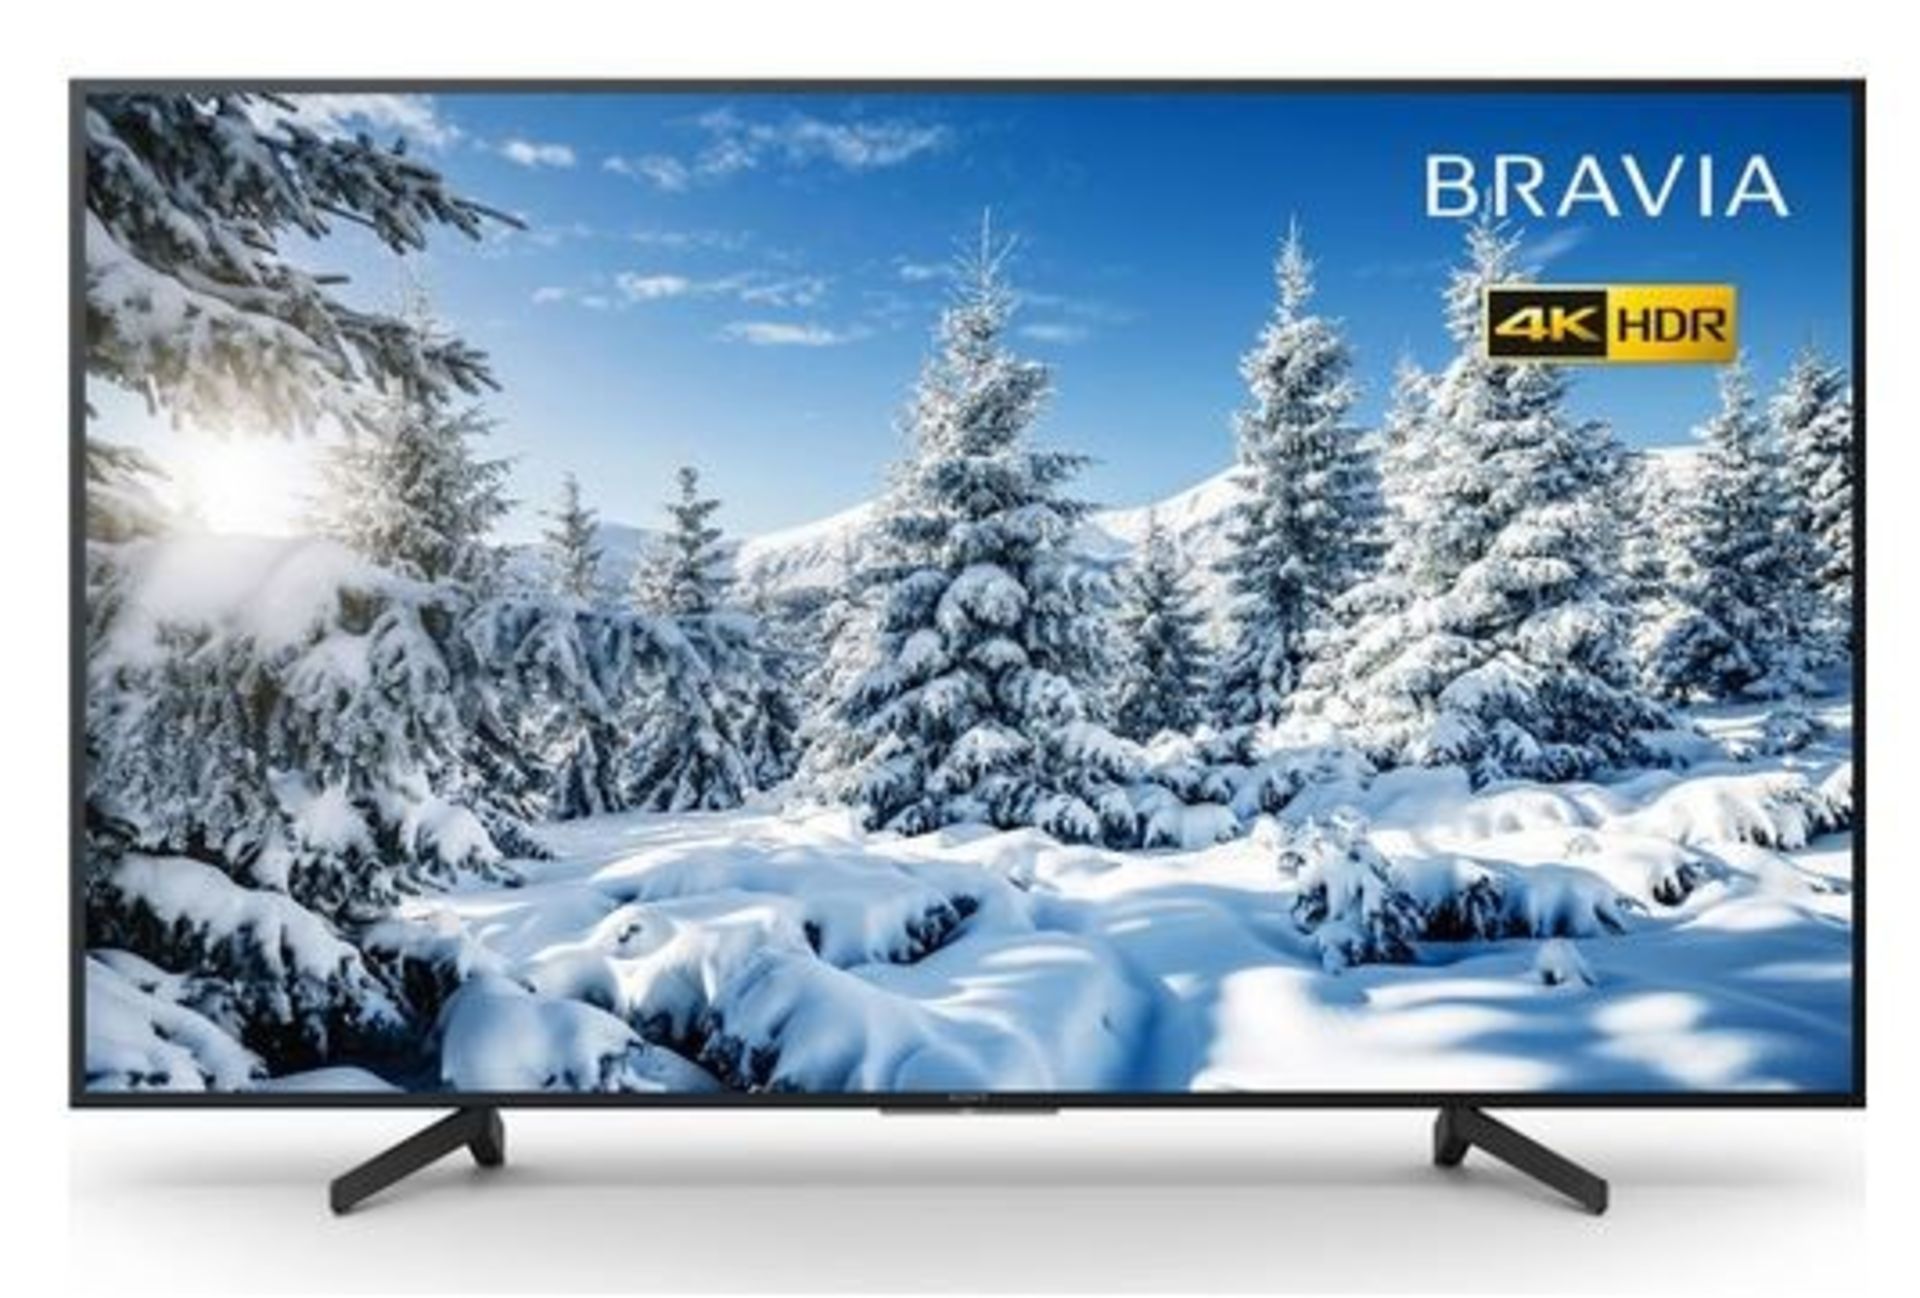 1 BOXED AND UNTESTED SONY BRAVIA 65" 4K HDR SMART TV - XG70 / SLIGHT DAMAGES TO THE SCREEN, NO POWER